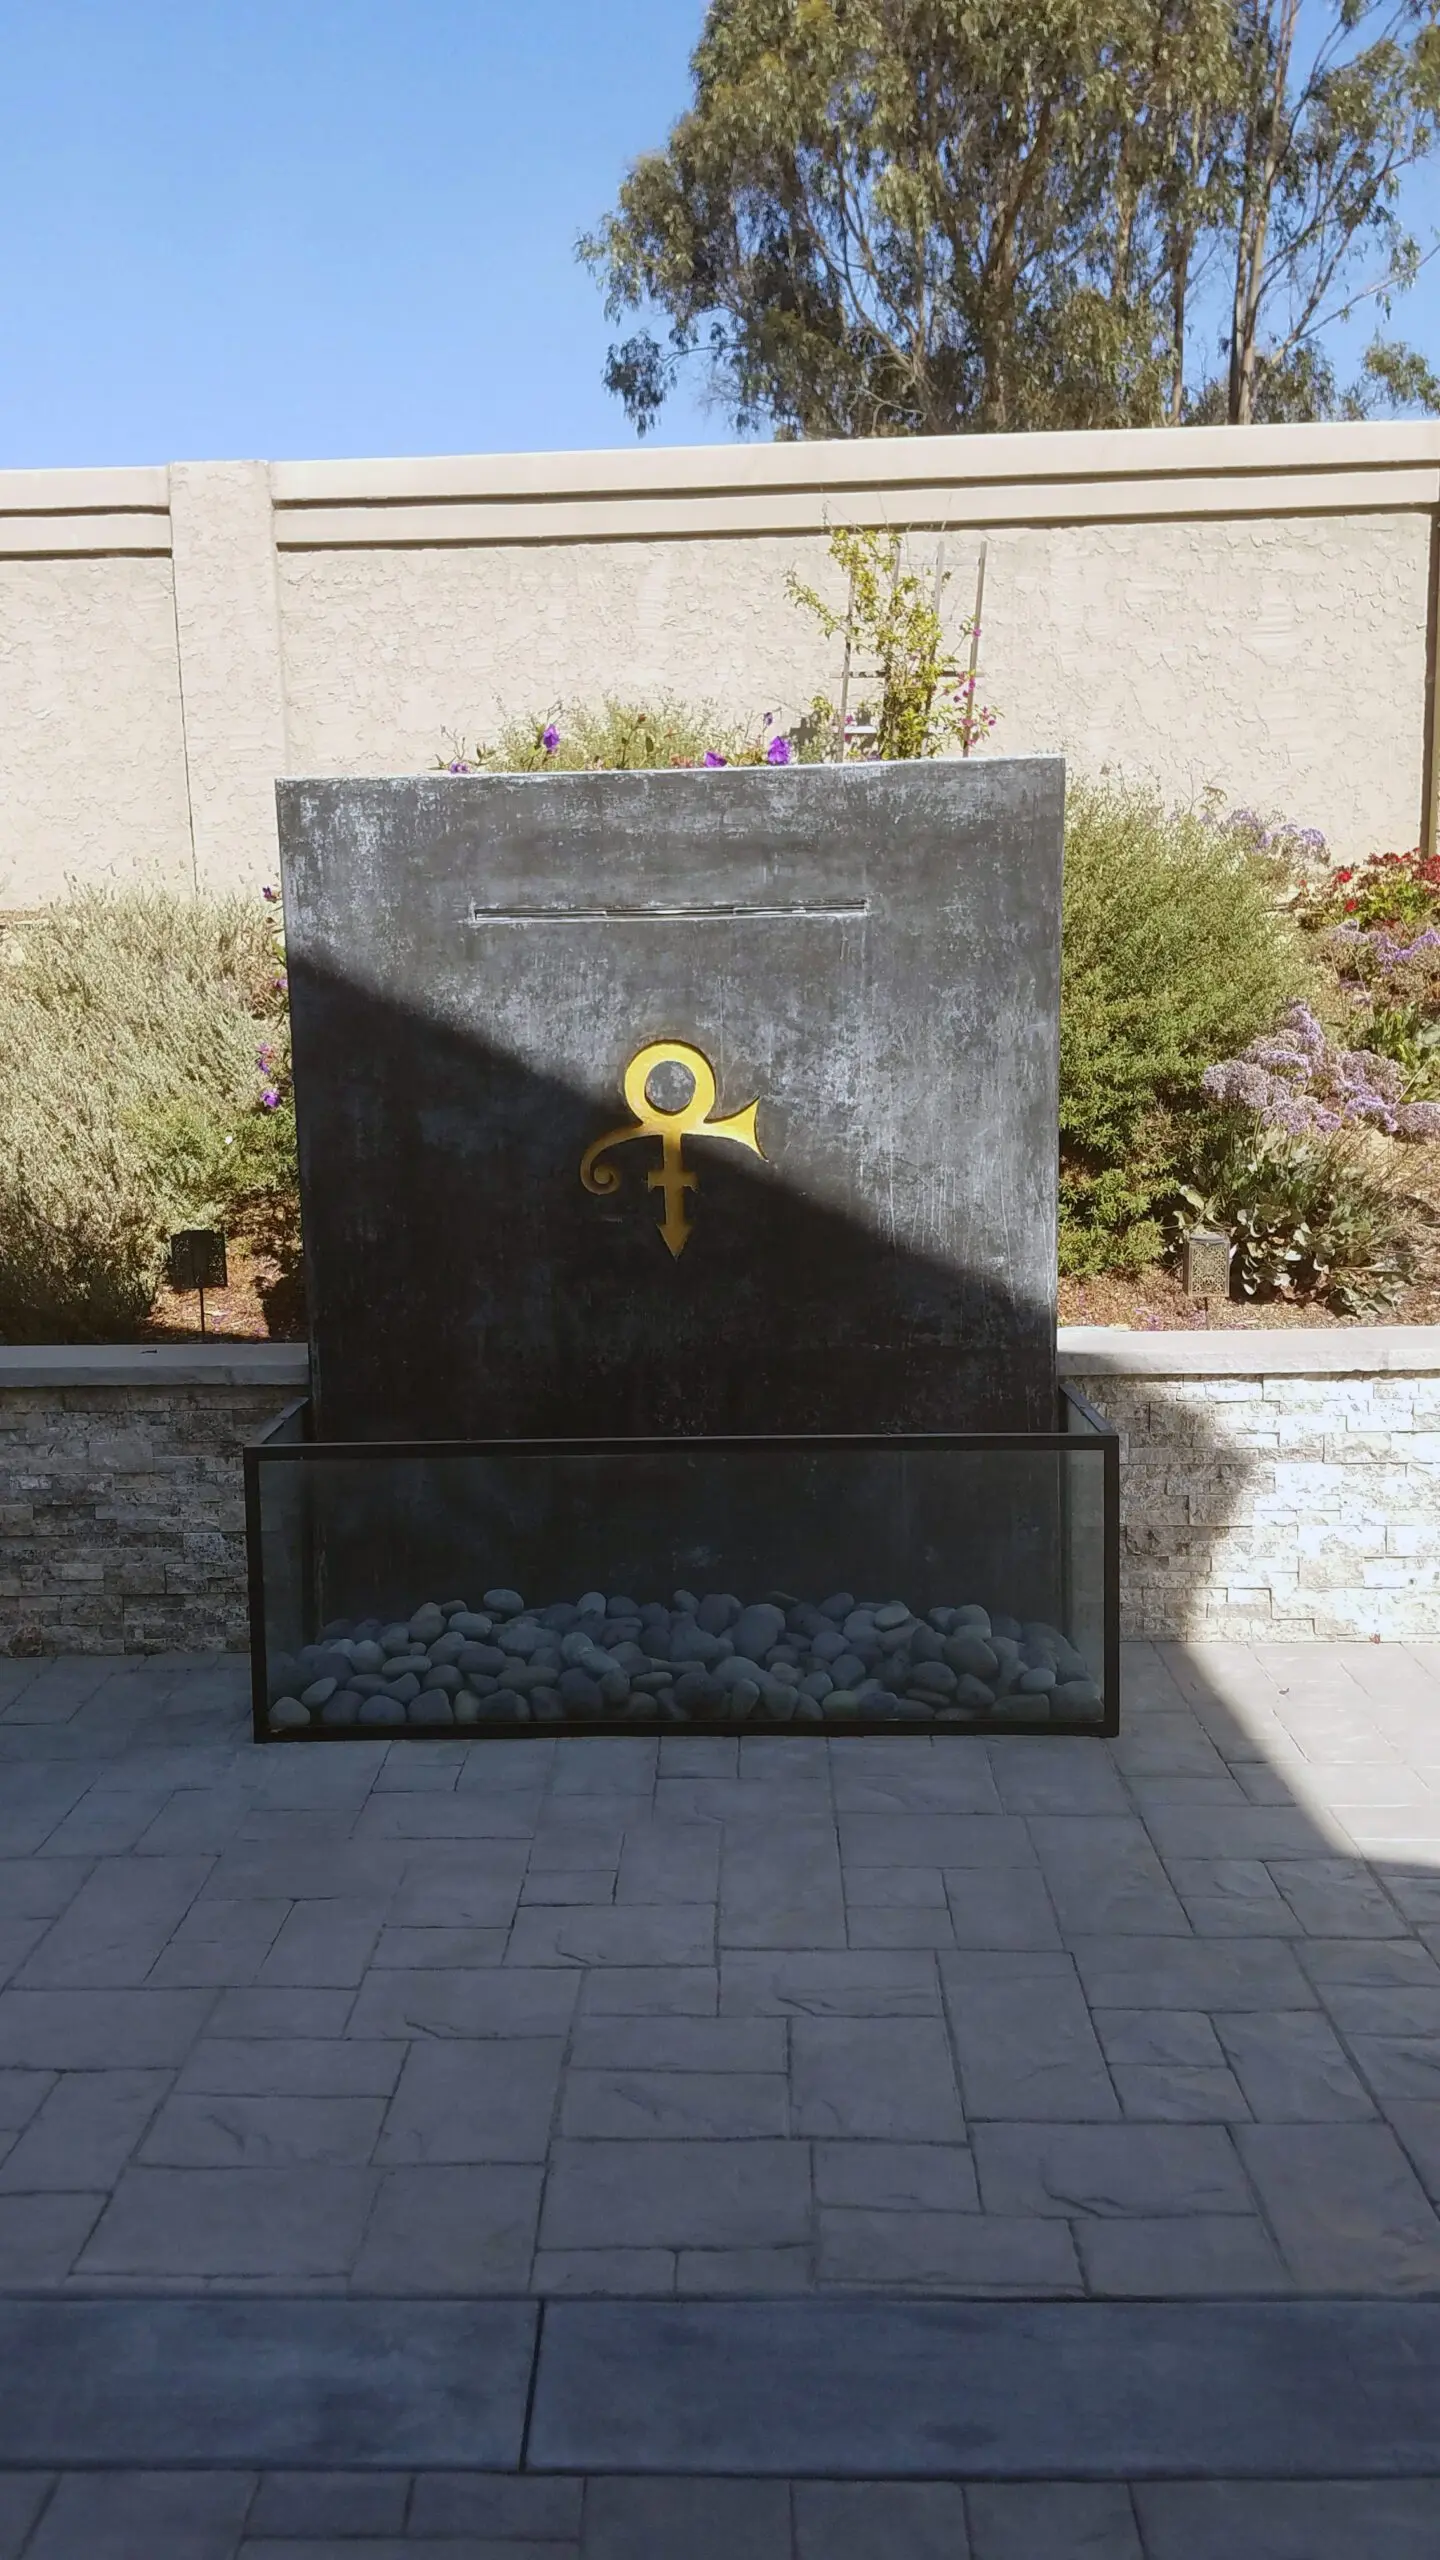 Before image showing a faded concrete monument dedicated to Prince, with his signature symbol engraved.